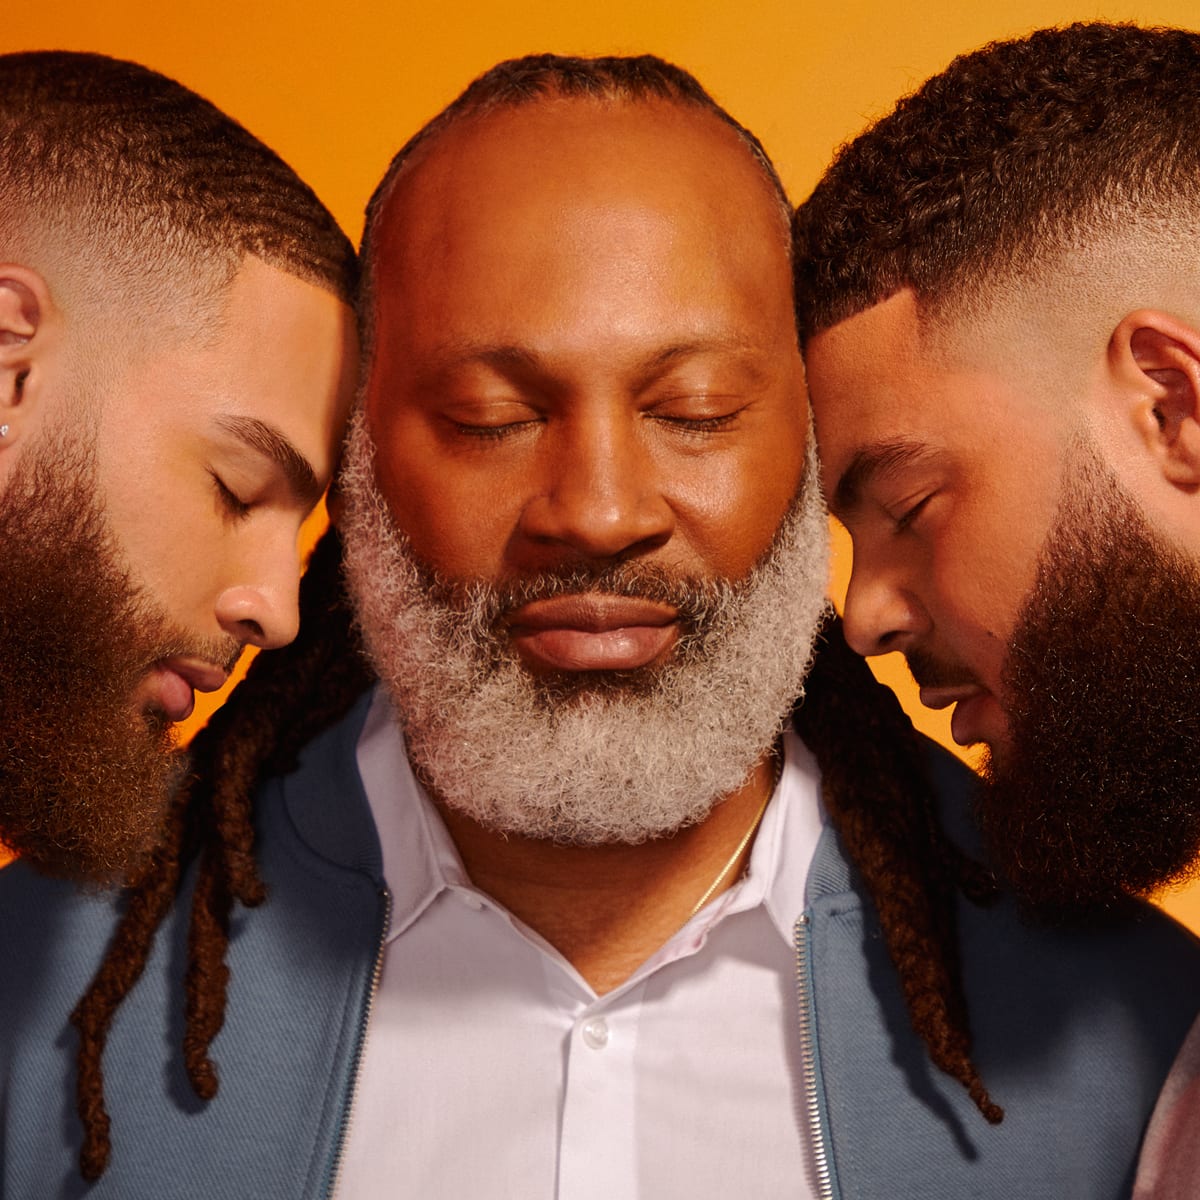 SheaMoisture Is on a Mission to Make Personal Care More Inclusive of Black  Men - Fashionista